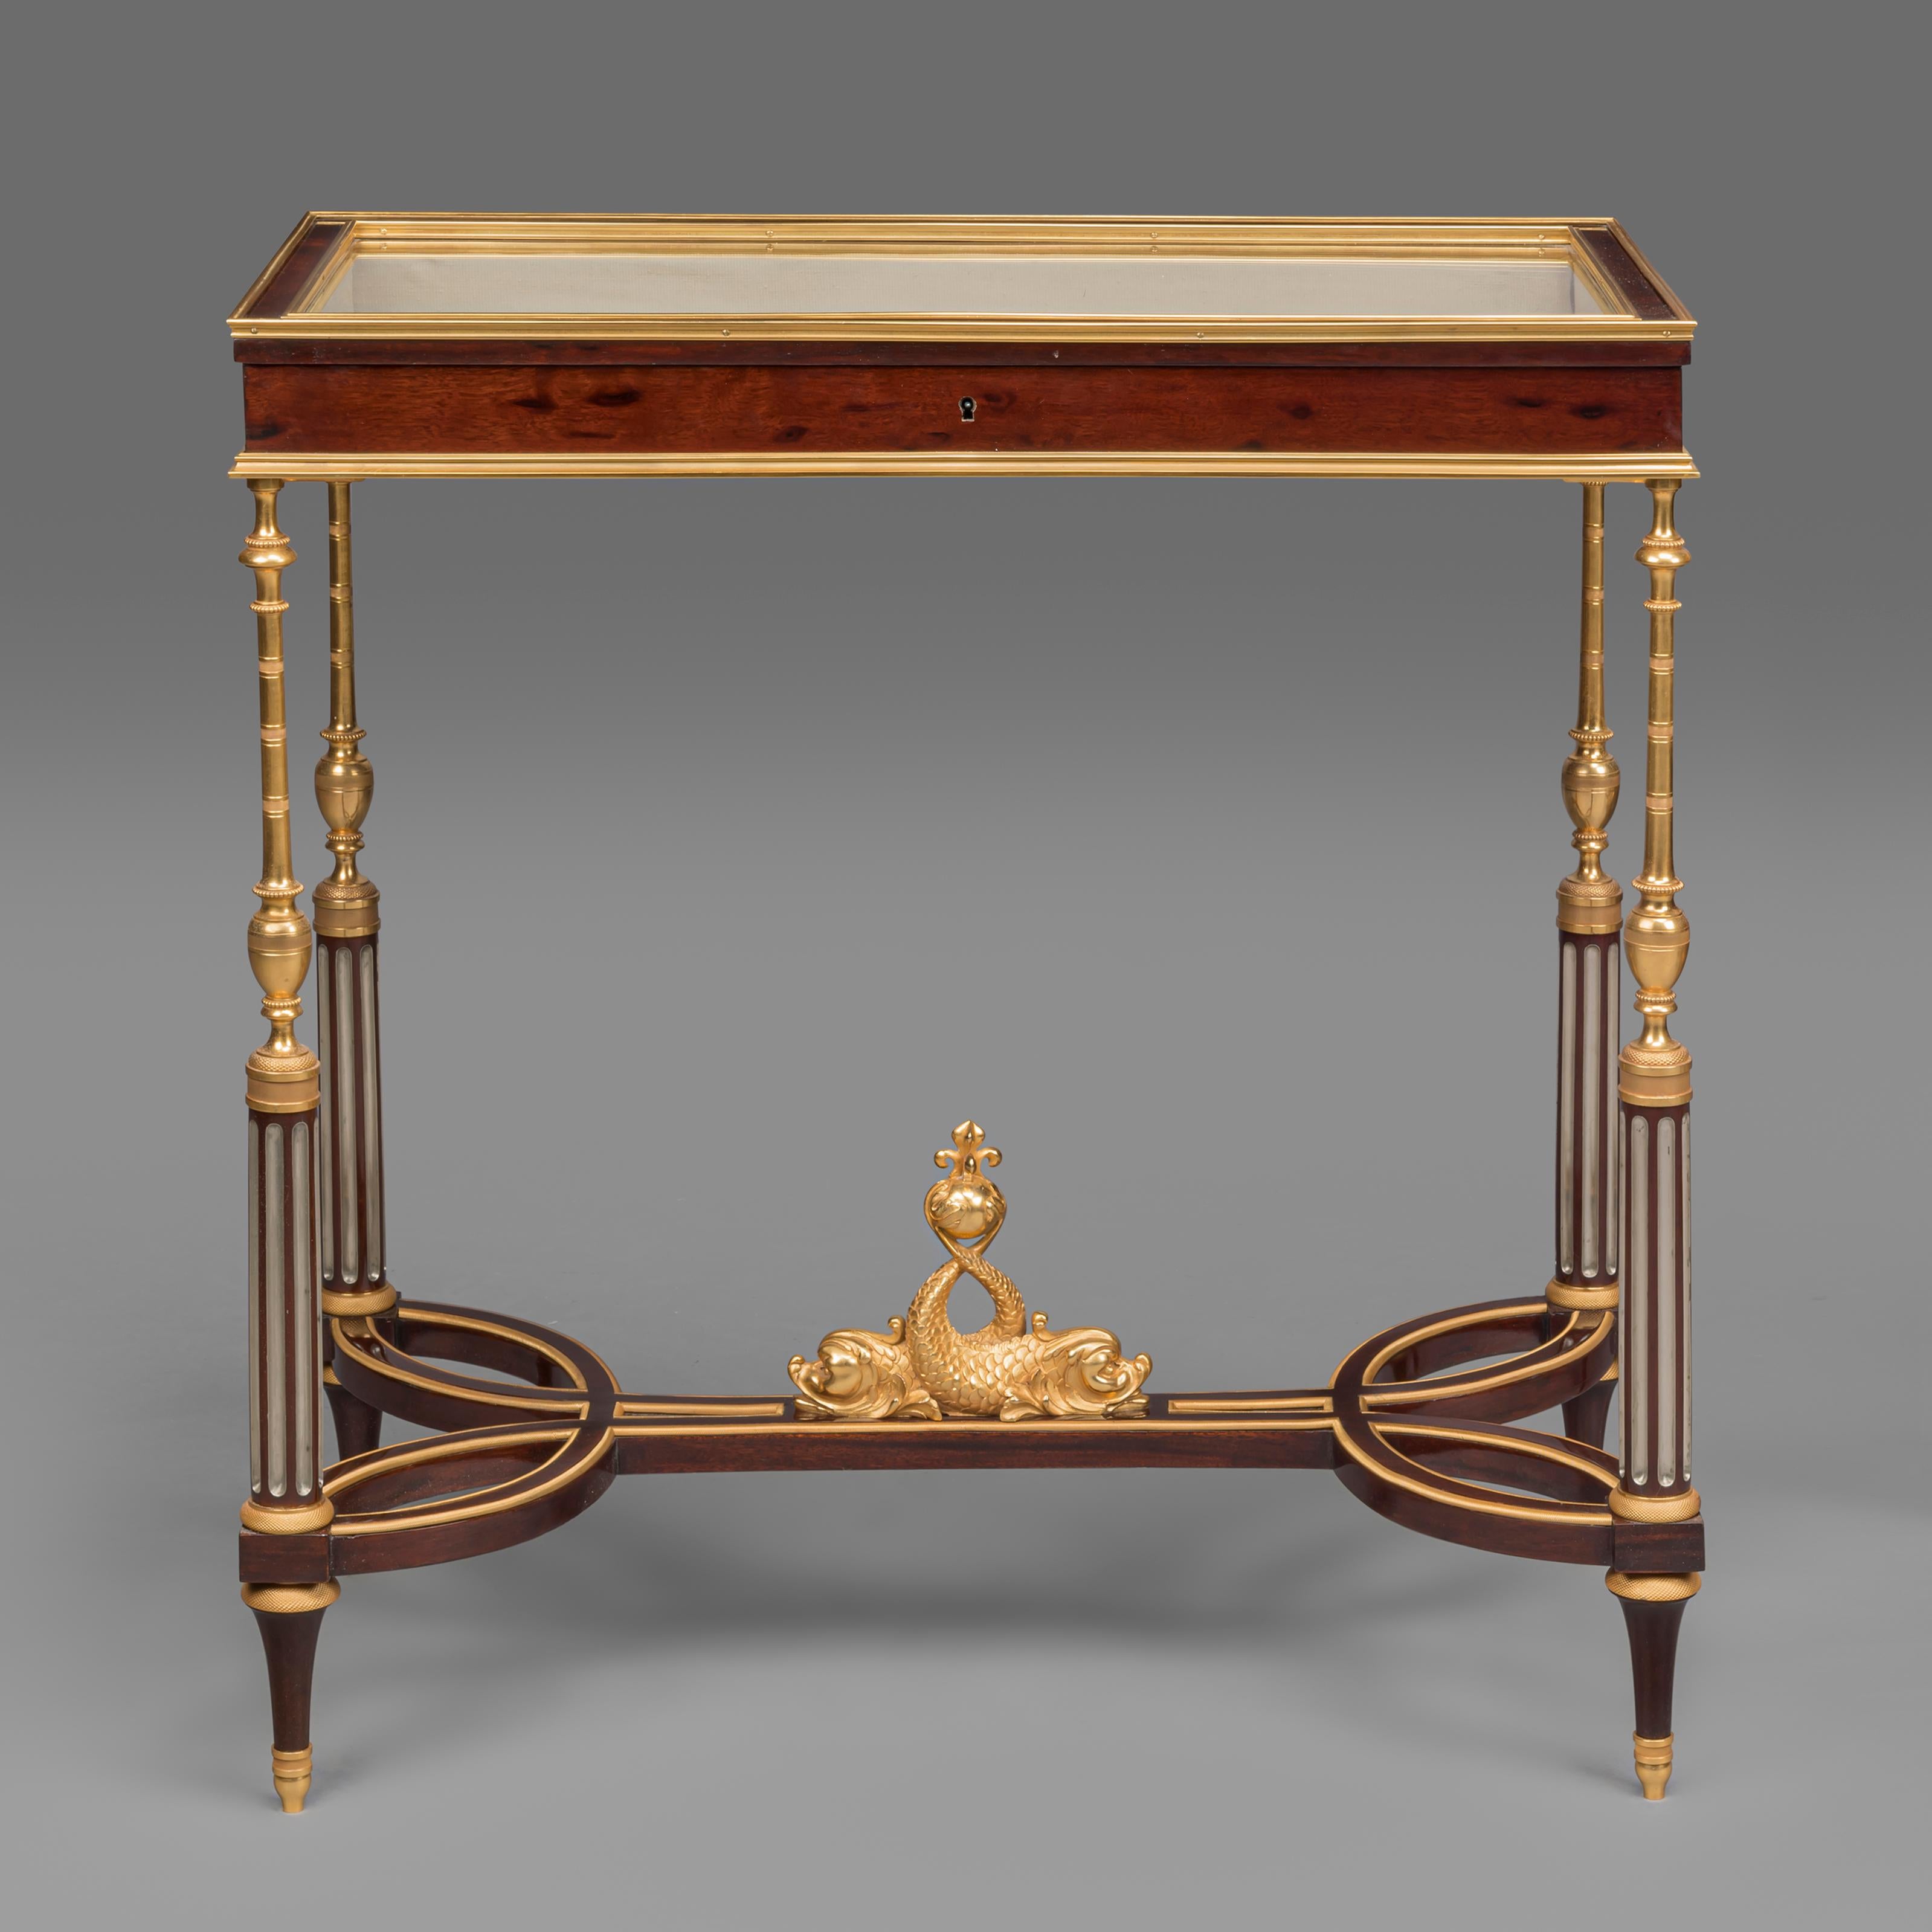 A Rare Pair of Louis XVI Style Gilt-Bronze Mounted Vitrine Tables In The Manner of Weisweiler, by Georges-François Alix.

This rare pair of mahogany vitrine tables each have a hinged rectangular glass top opening to shallow velvet lined interiors. 